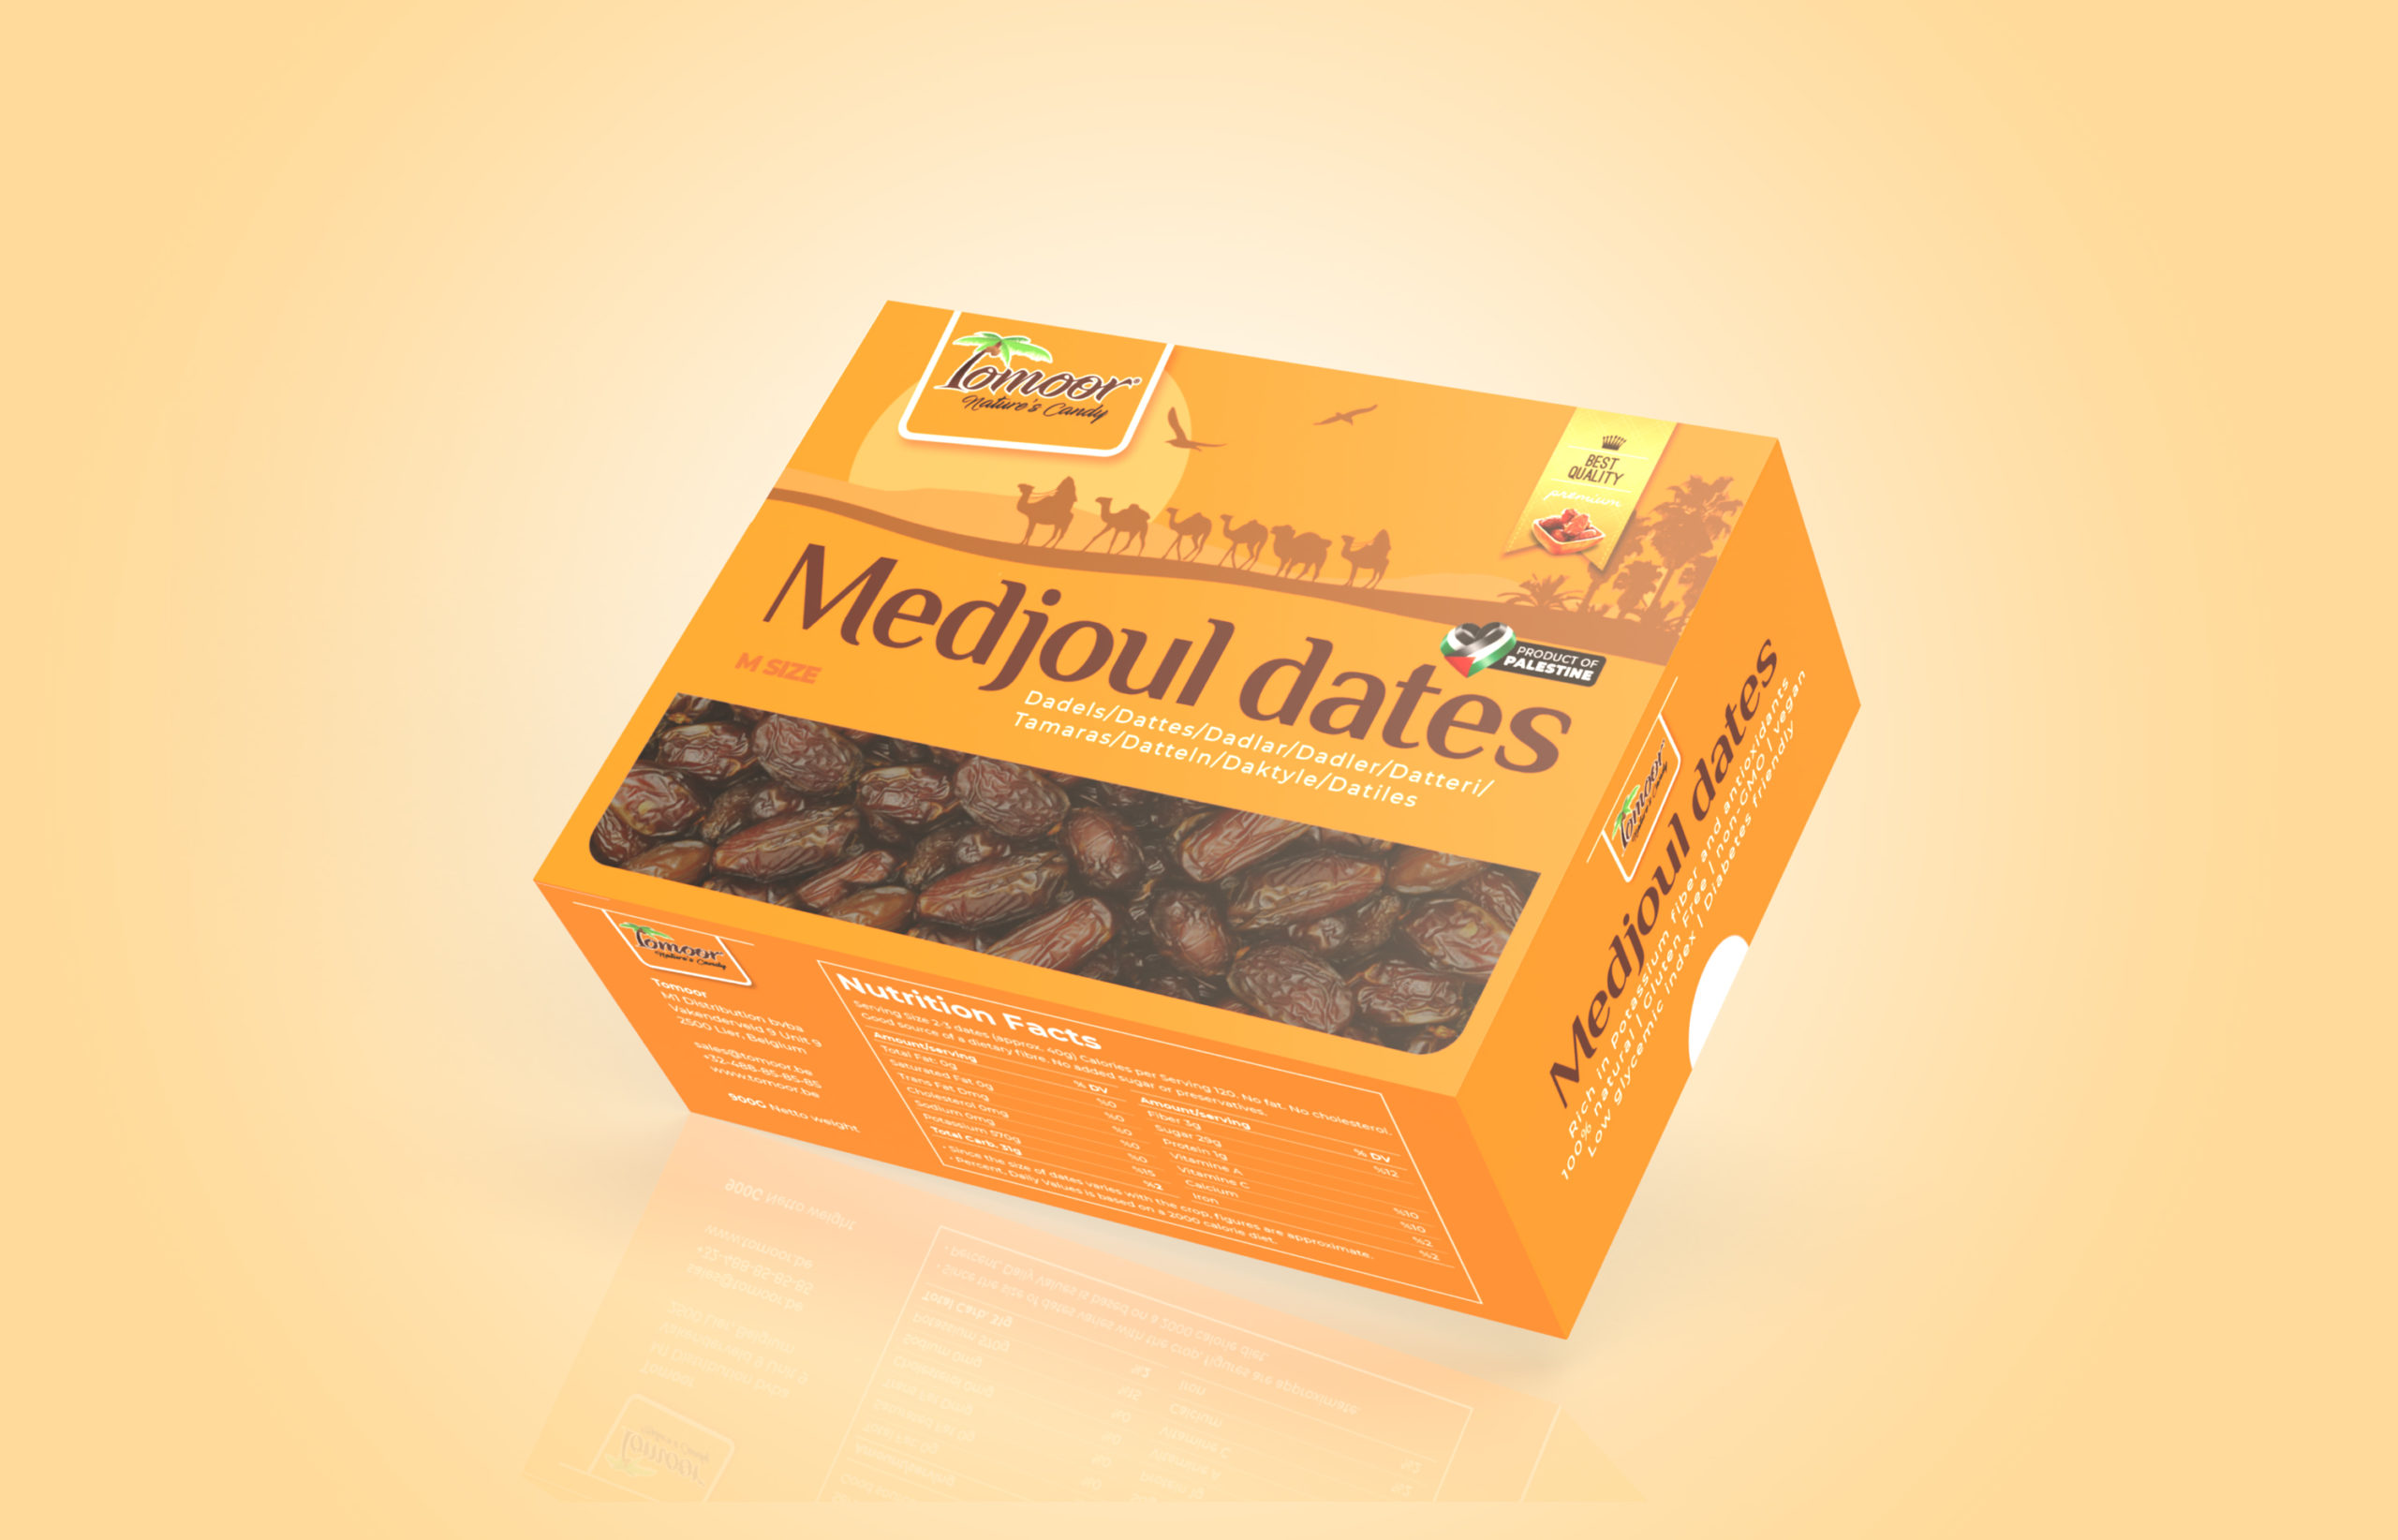 Dates package design